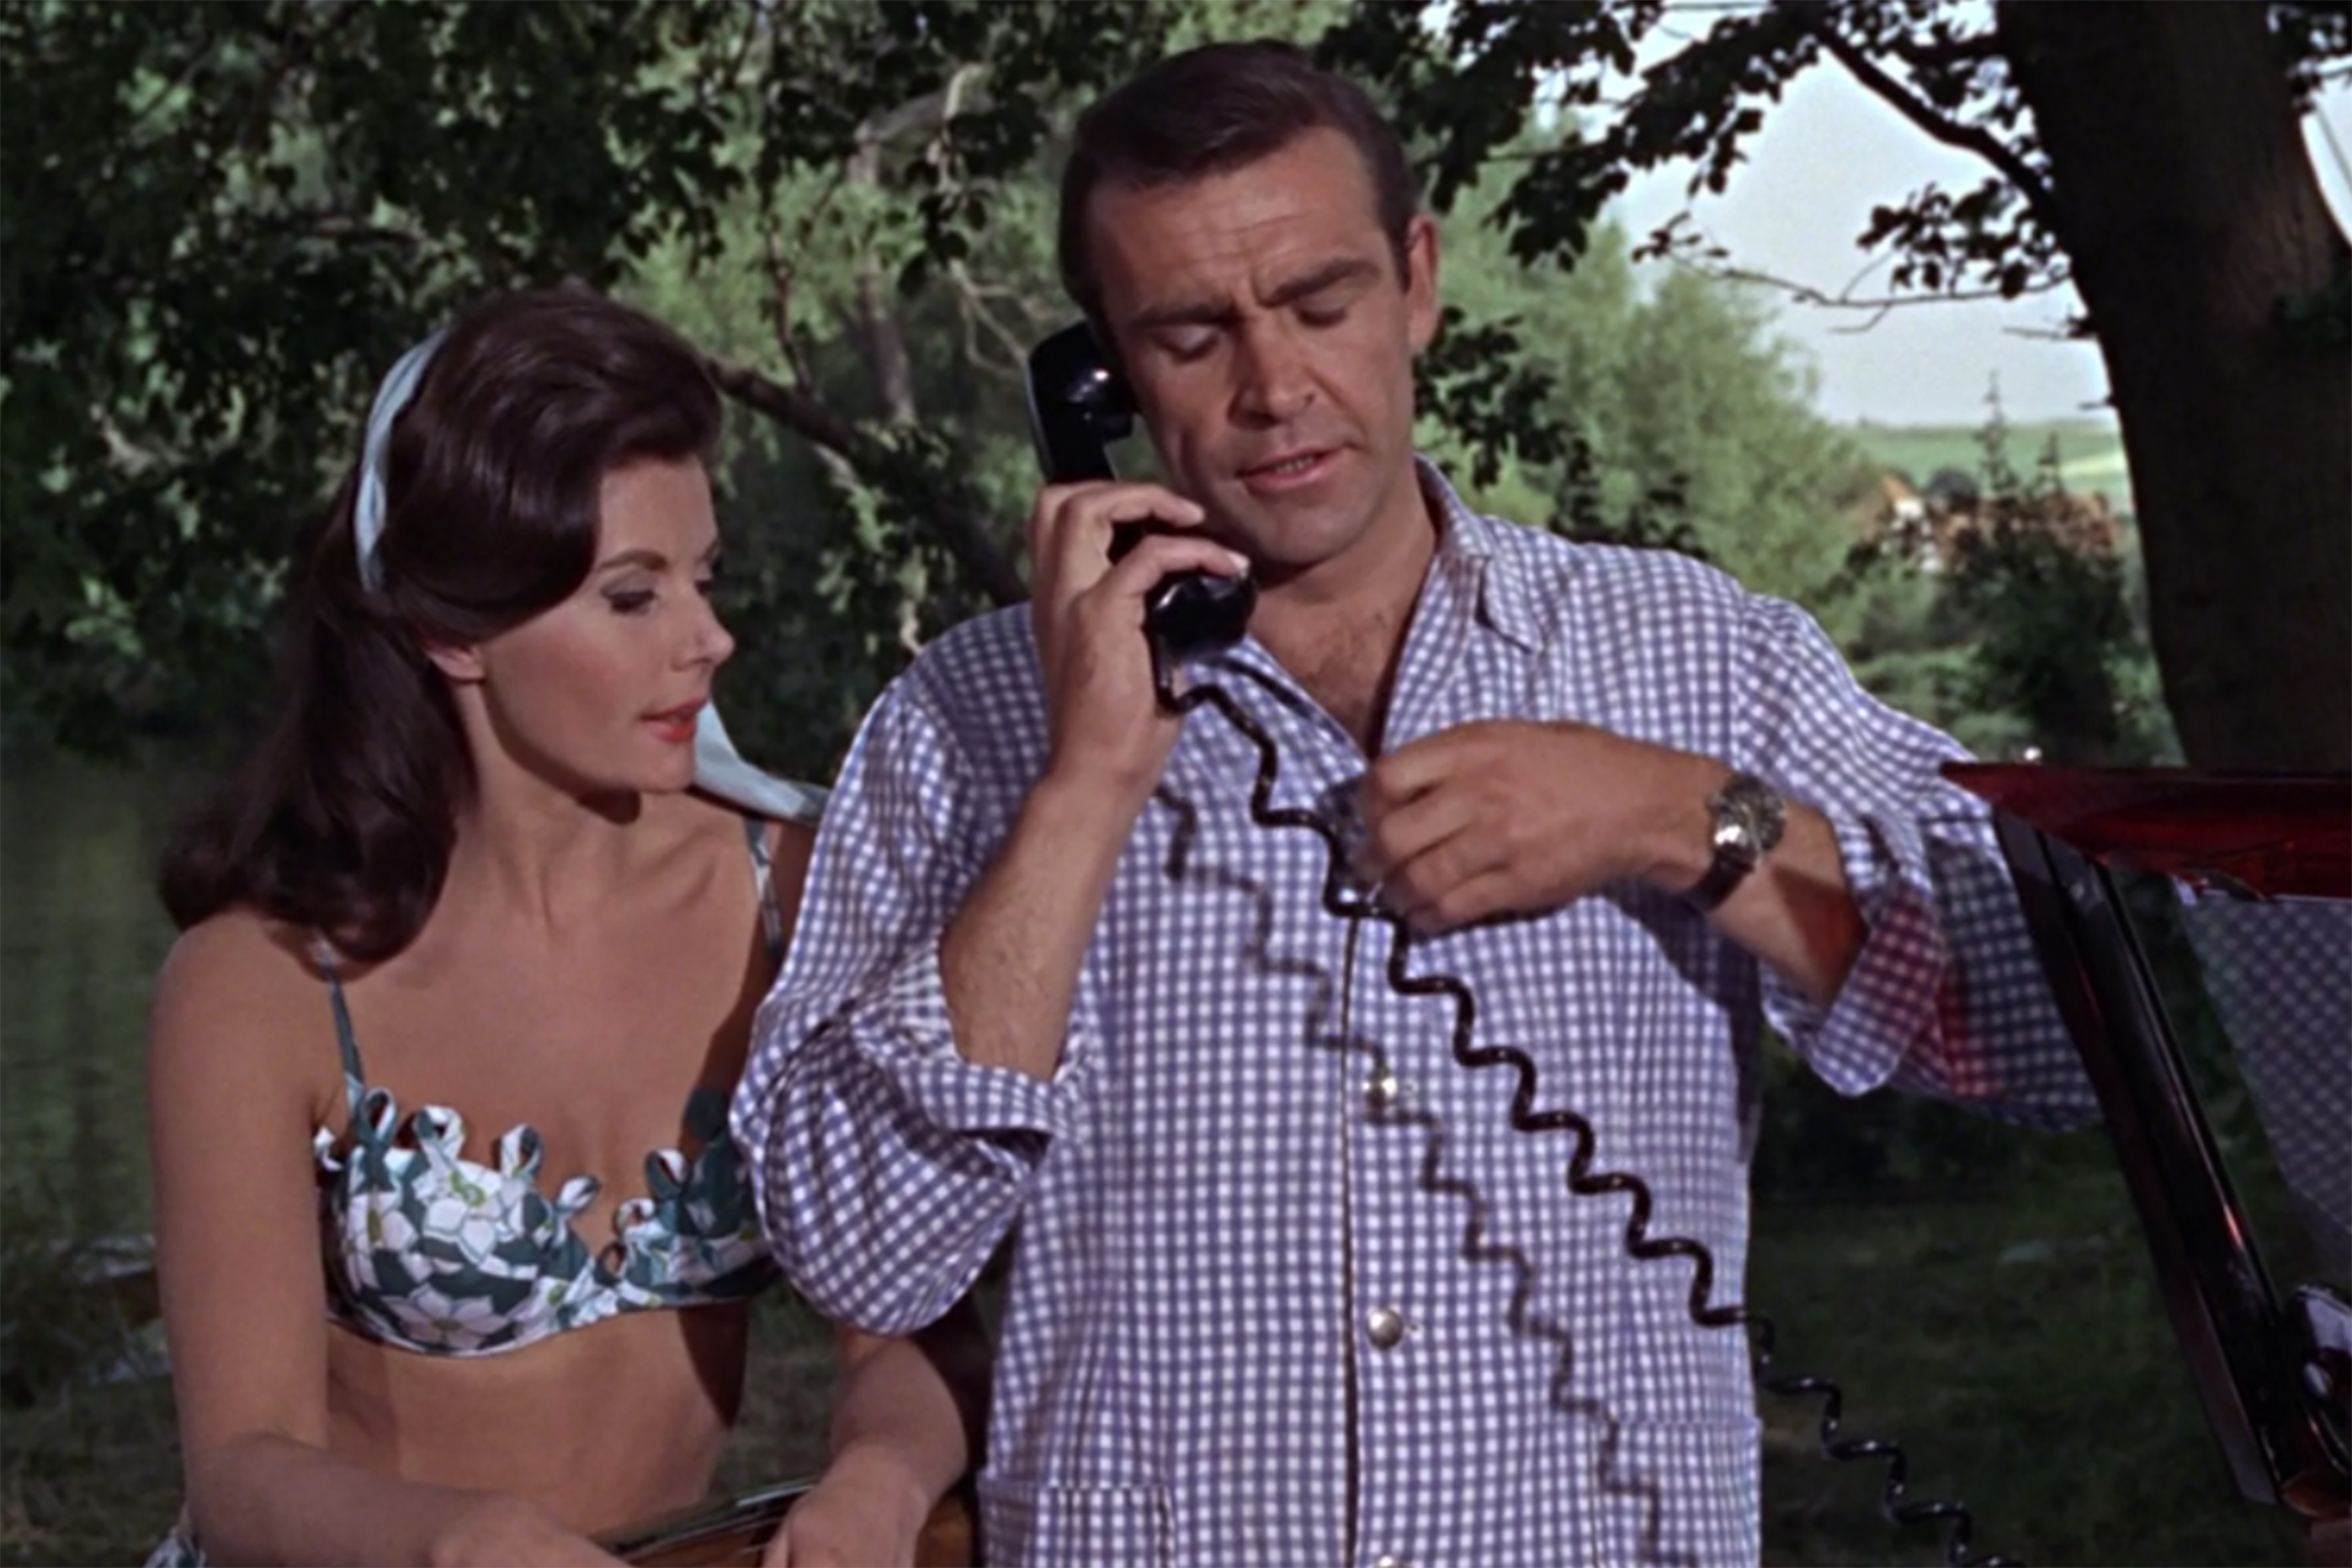 In From Russia with Love, Connery dons a purple gingham shirt.